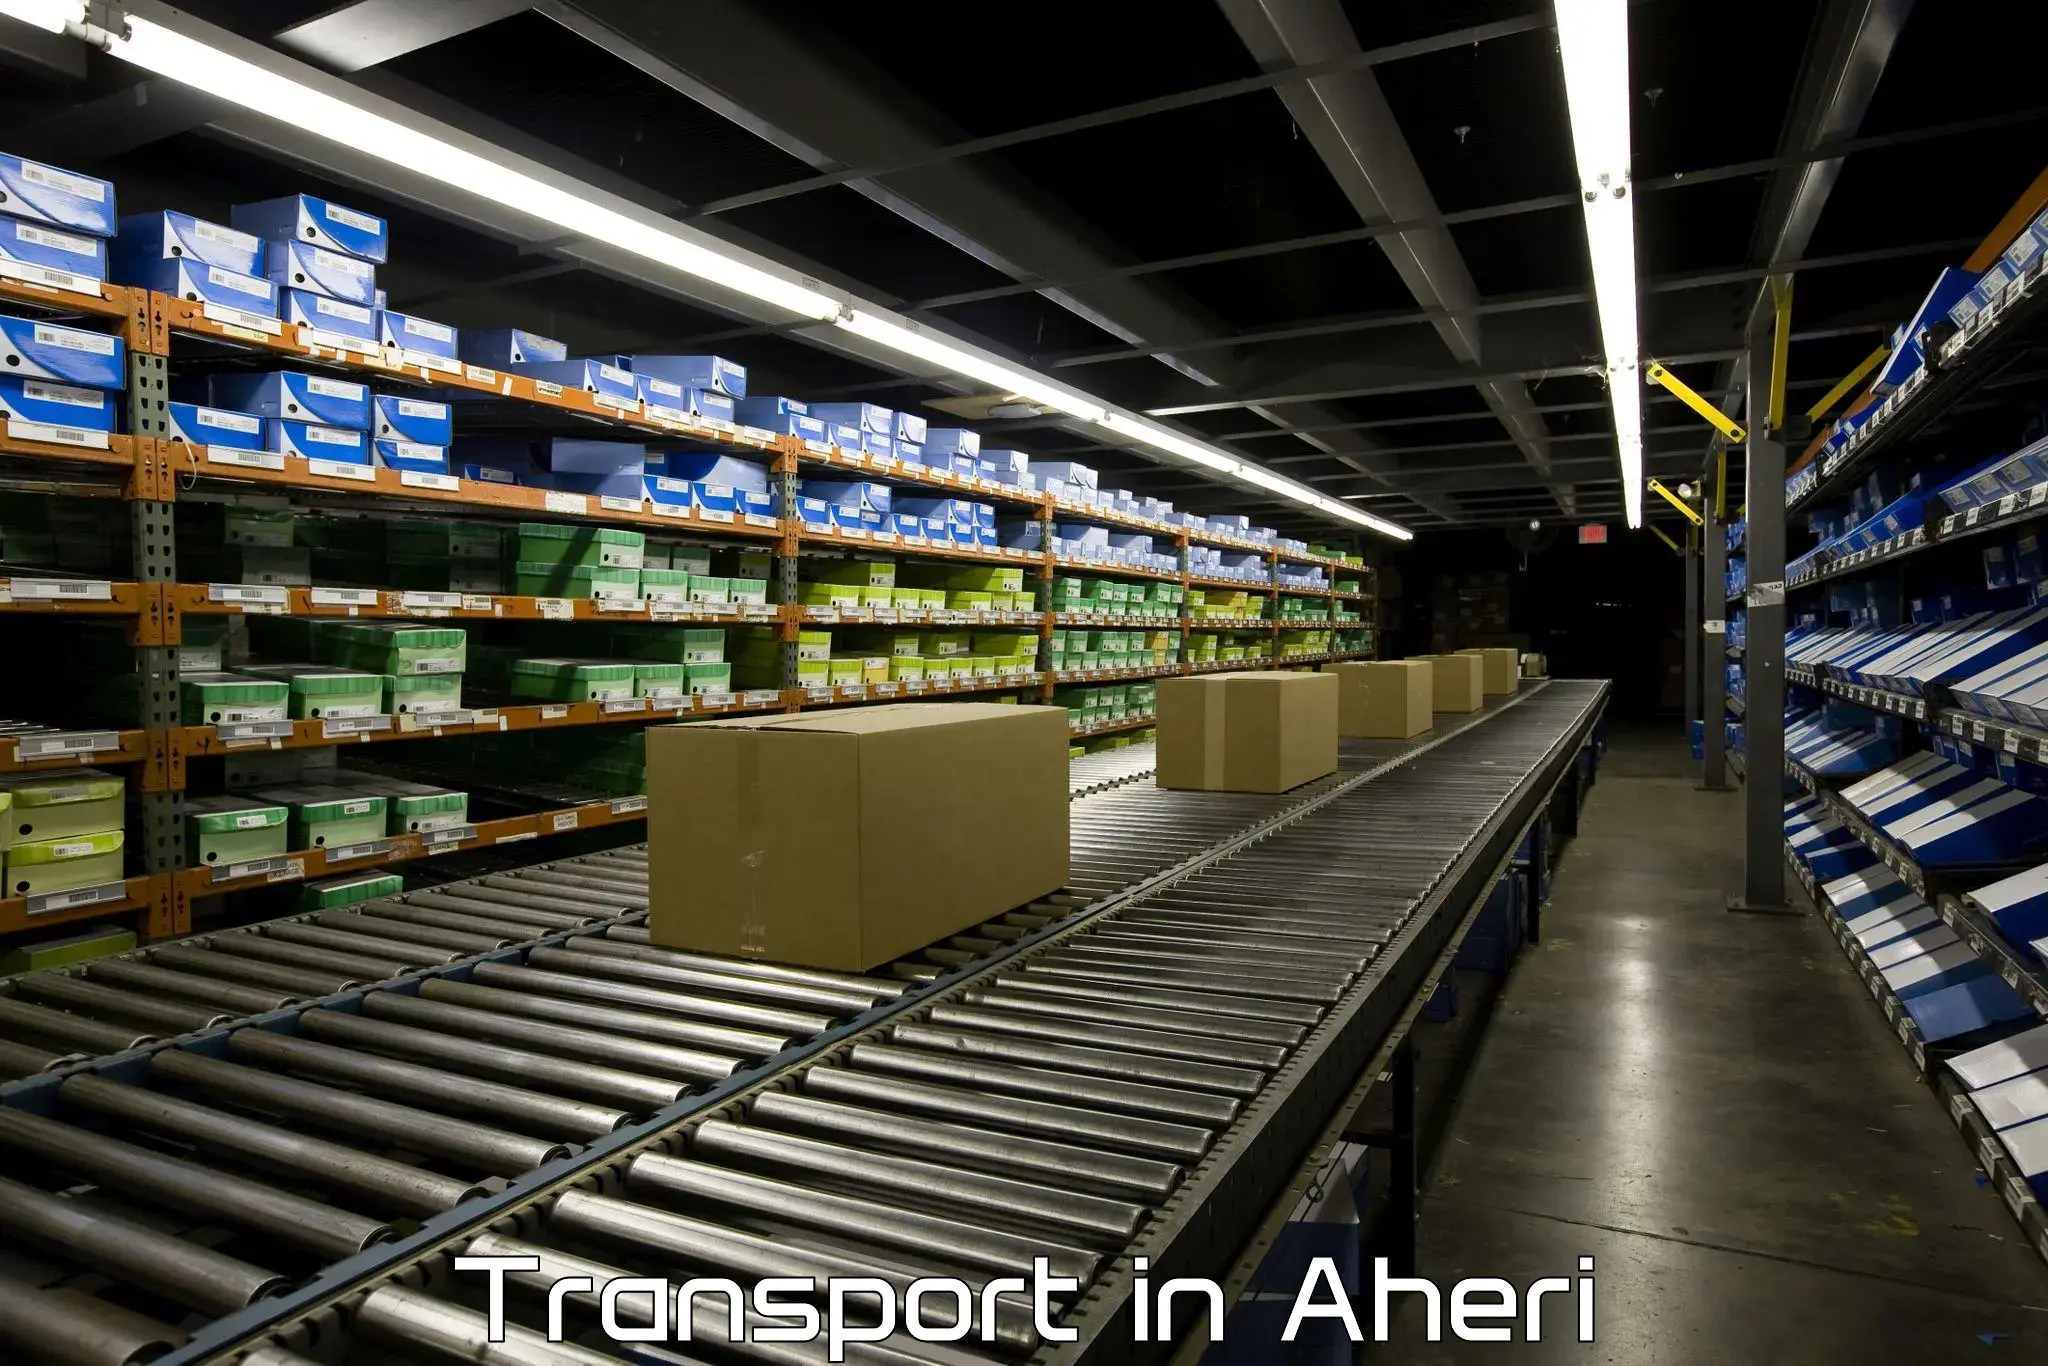 Transport shared services in Aheri